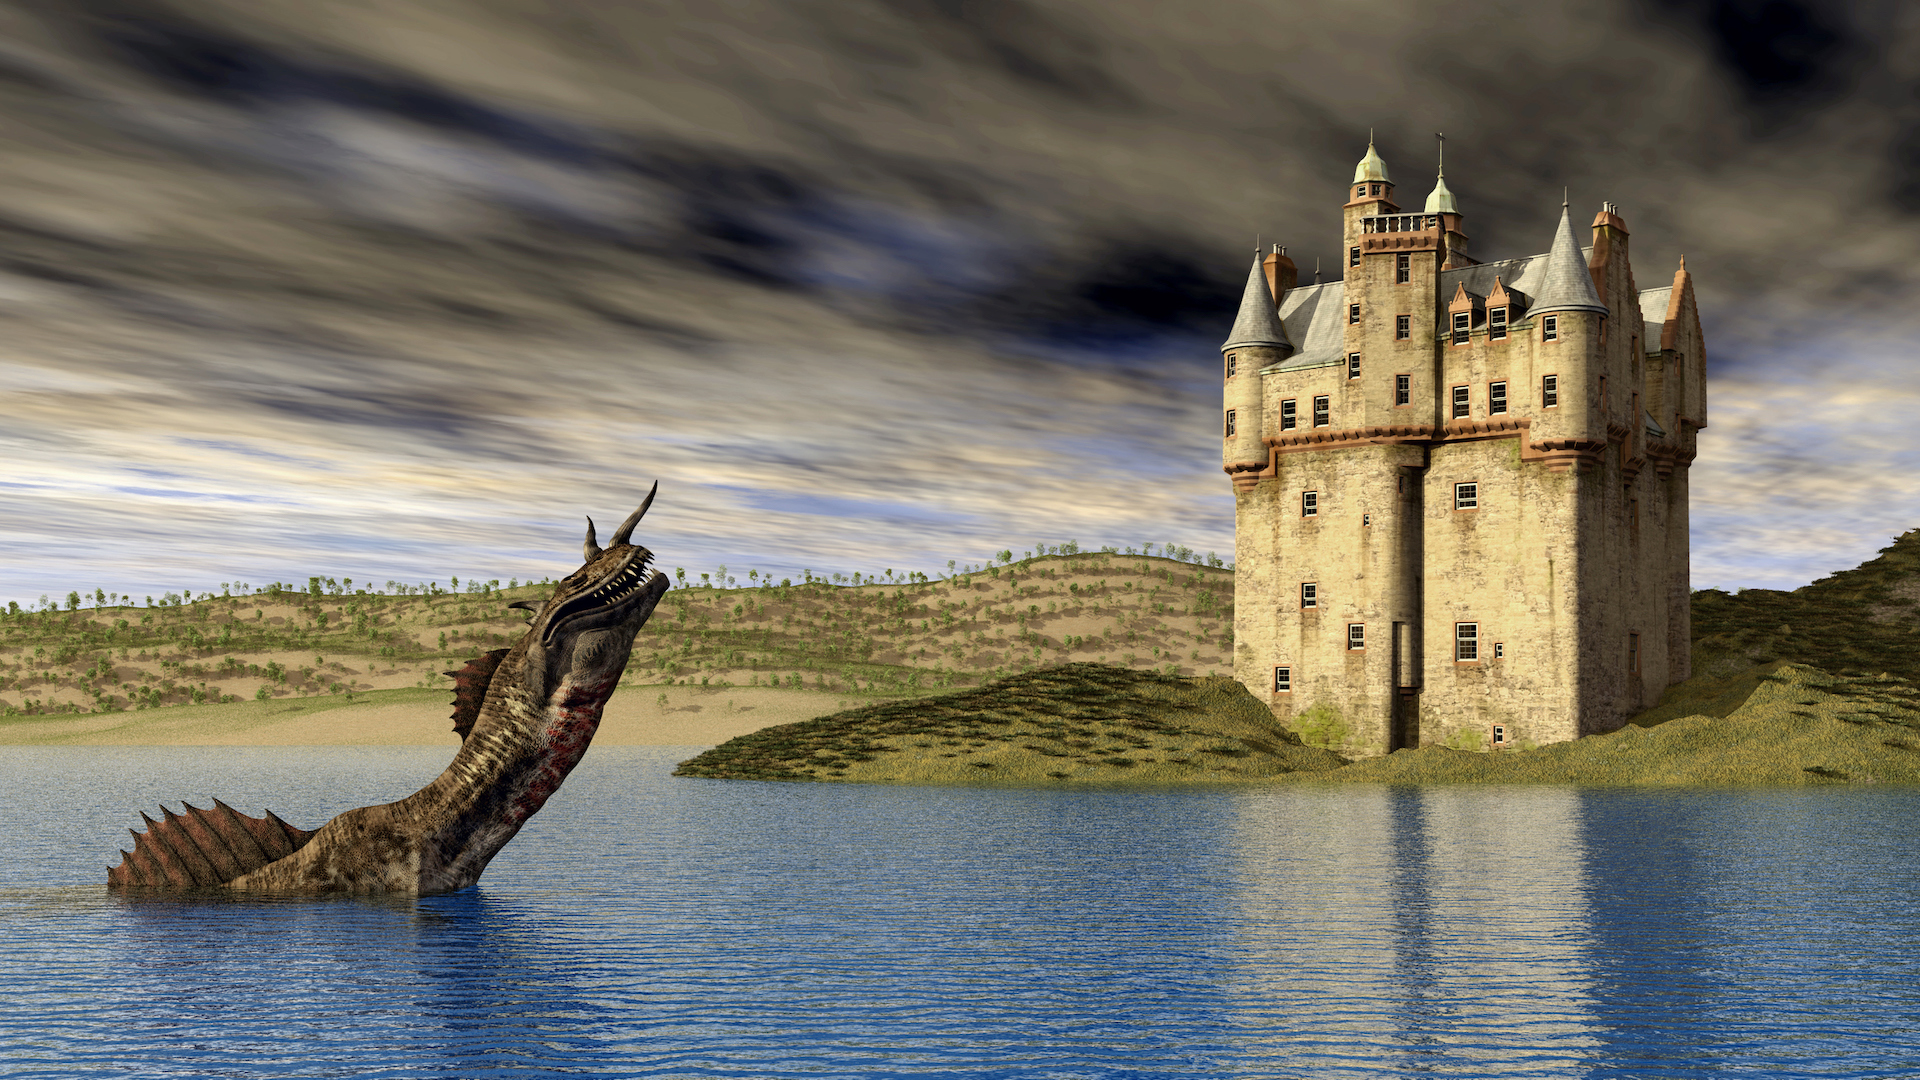 The Loch Ness Monster and a Scottish castle